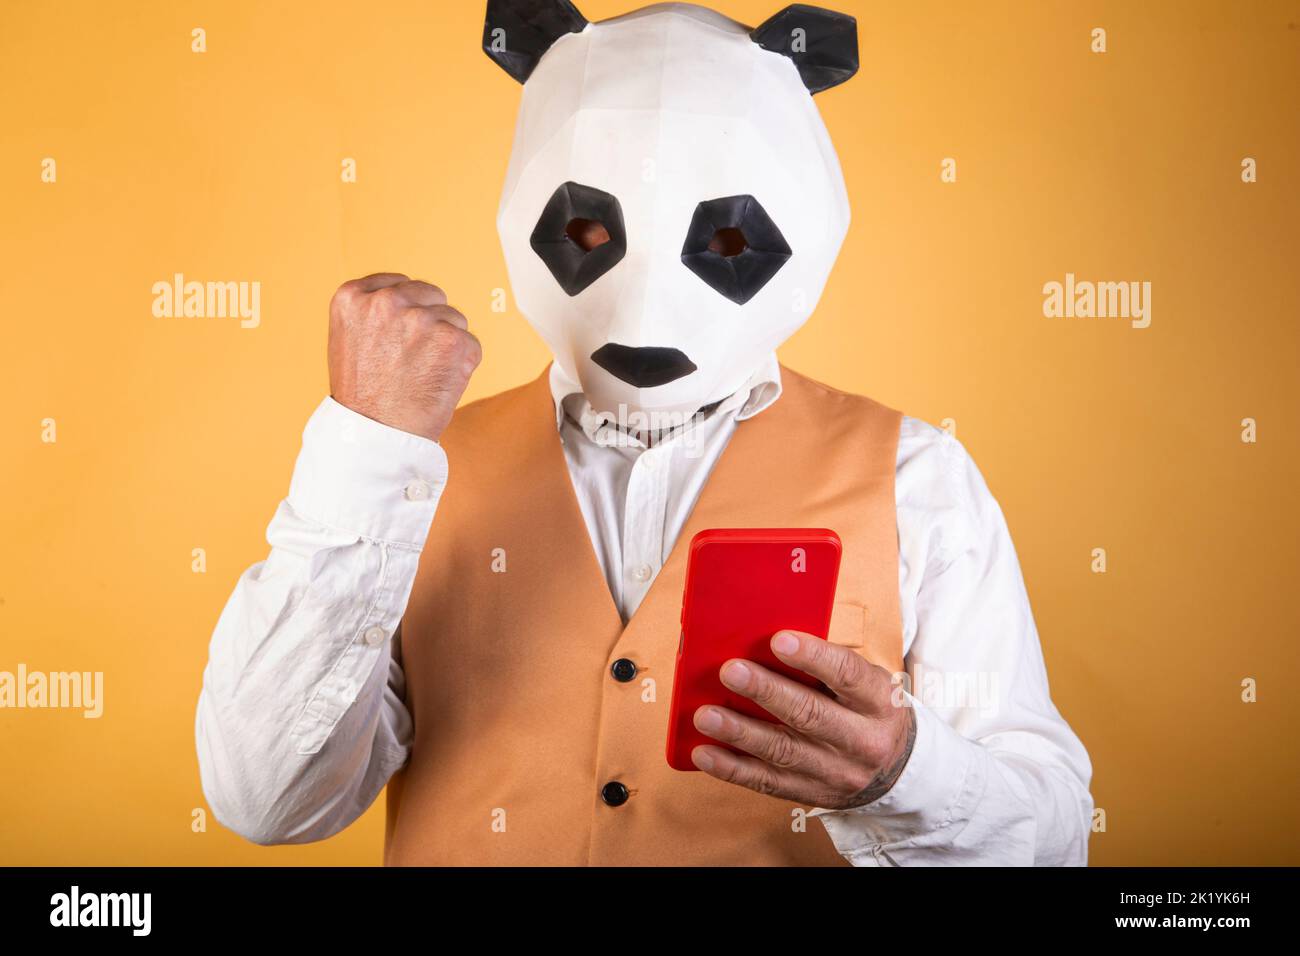 Man in suit and panda mask using a smartphone Stock Photo